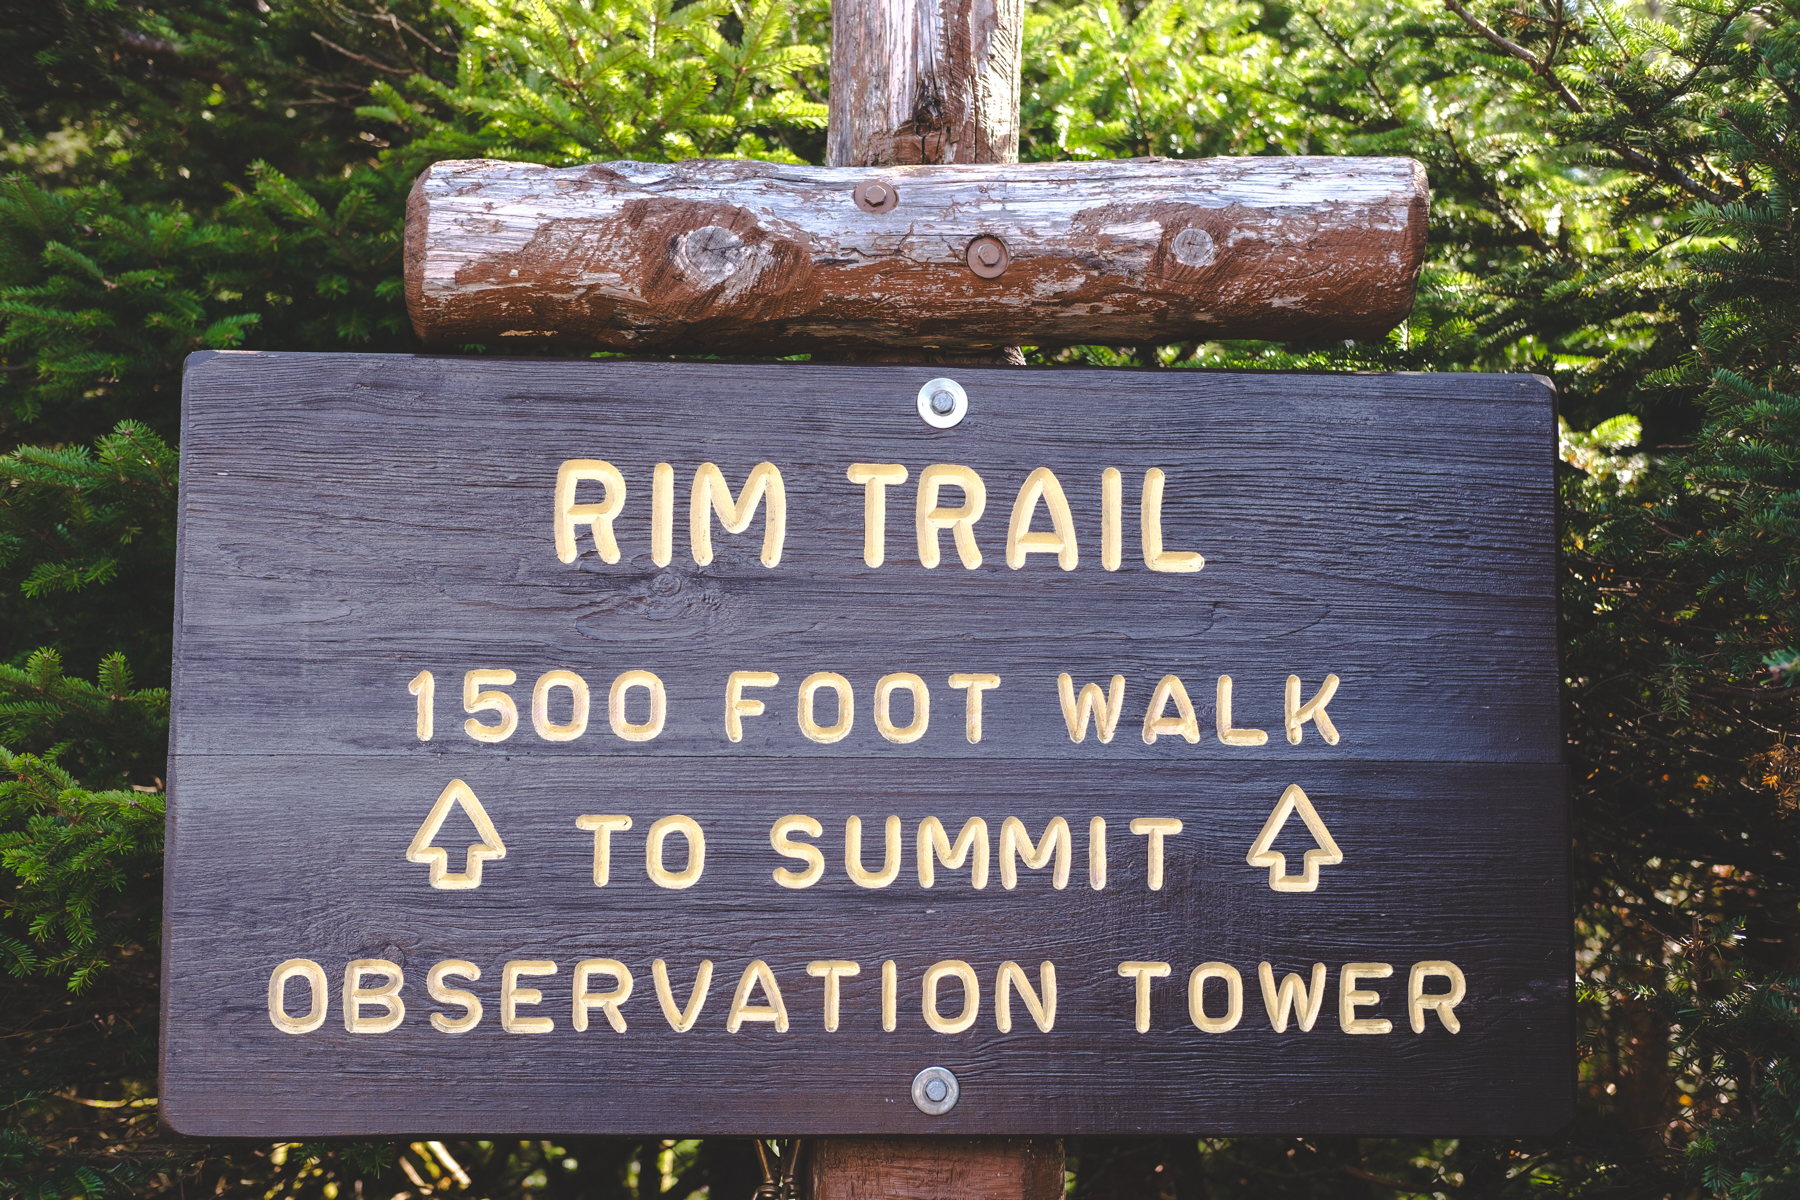 A wooden sign with carved and painted text that reads “RIM TRAIL 1500 FOOT WALK TO SUMMIT OBSERVATION TOWER” with arrow symbols pointing upwards. The sign is mounted on rustic wooden posts.